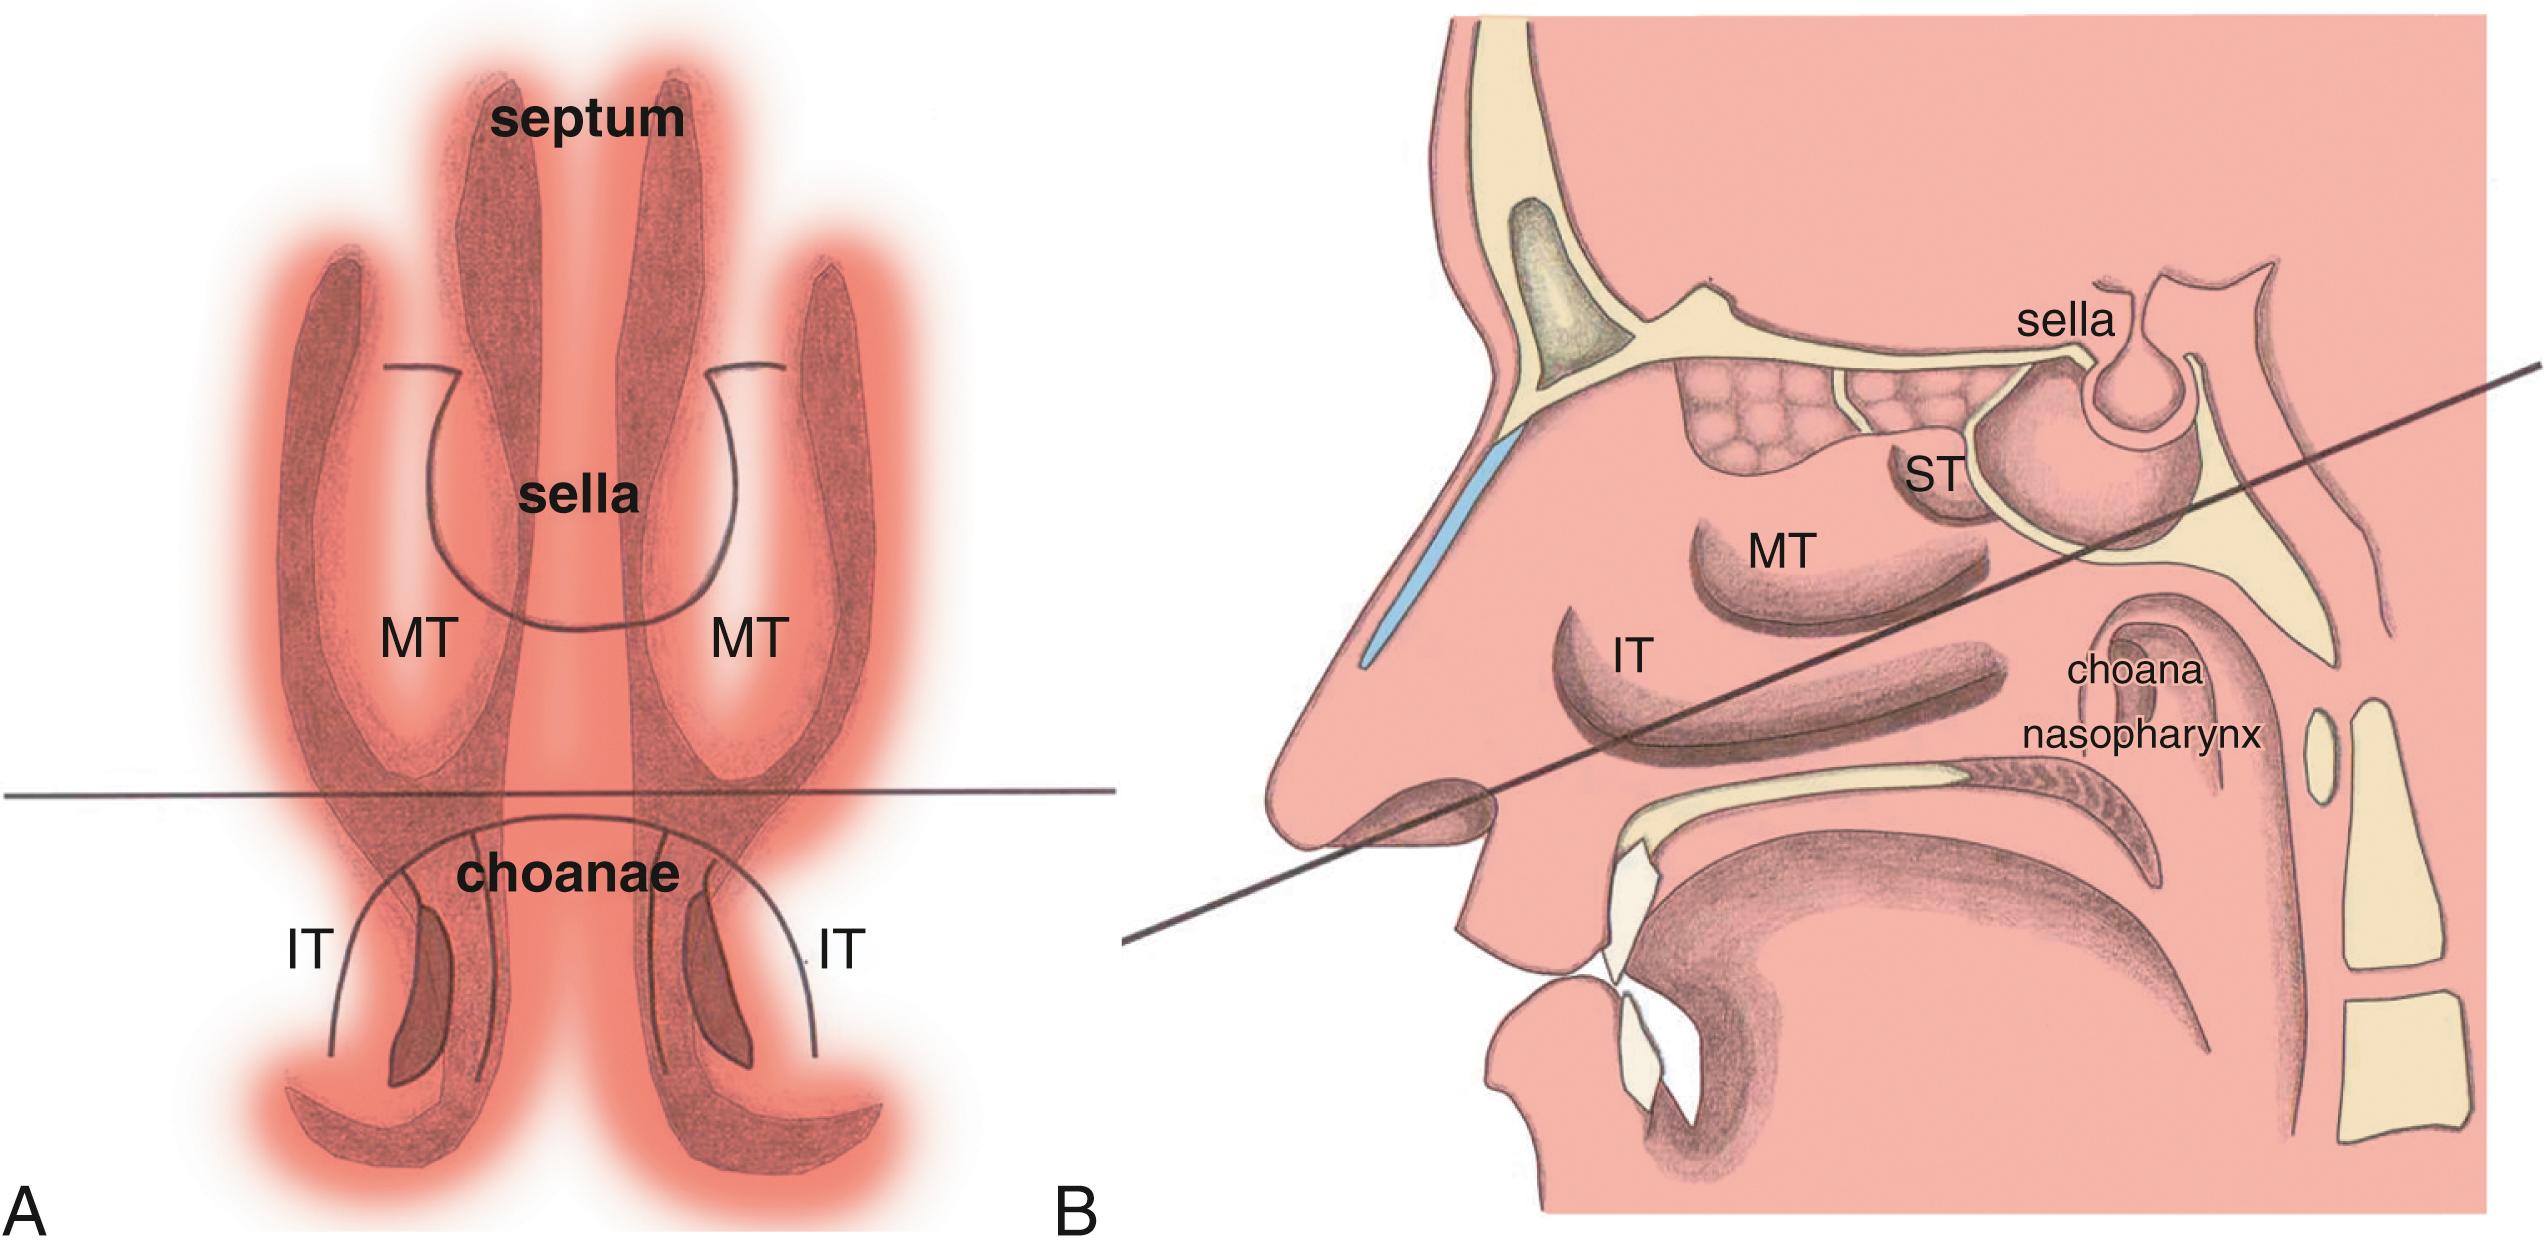 FIGURE 15.1, Schematic drawings of the sinonasal cavity, coronal (A) and sagittal (B) views, demonstrate the anatomic landmarks leading to the sella. The inferior turbinate (IT) and middle turbinate (MT) are initially encountered along the endonasal route. A plane followed along the inferior margin of the middle turbinate leads to the clivus approximately 1 cm inferior to the floor of the sella, and just inferiorly is the upper margin of the choana with view of the nasopharynx that serves as a key surgical landmark. Confirmation of the middle turbinate in relation to the nasopharynx obviates confusion of the middle turbinate with the superior turbinate (ST) , which is especially important in occasional cases of an anatomic supreme turbinate.